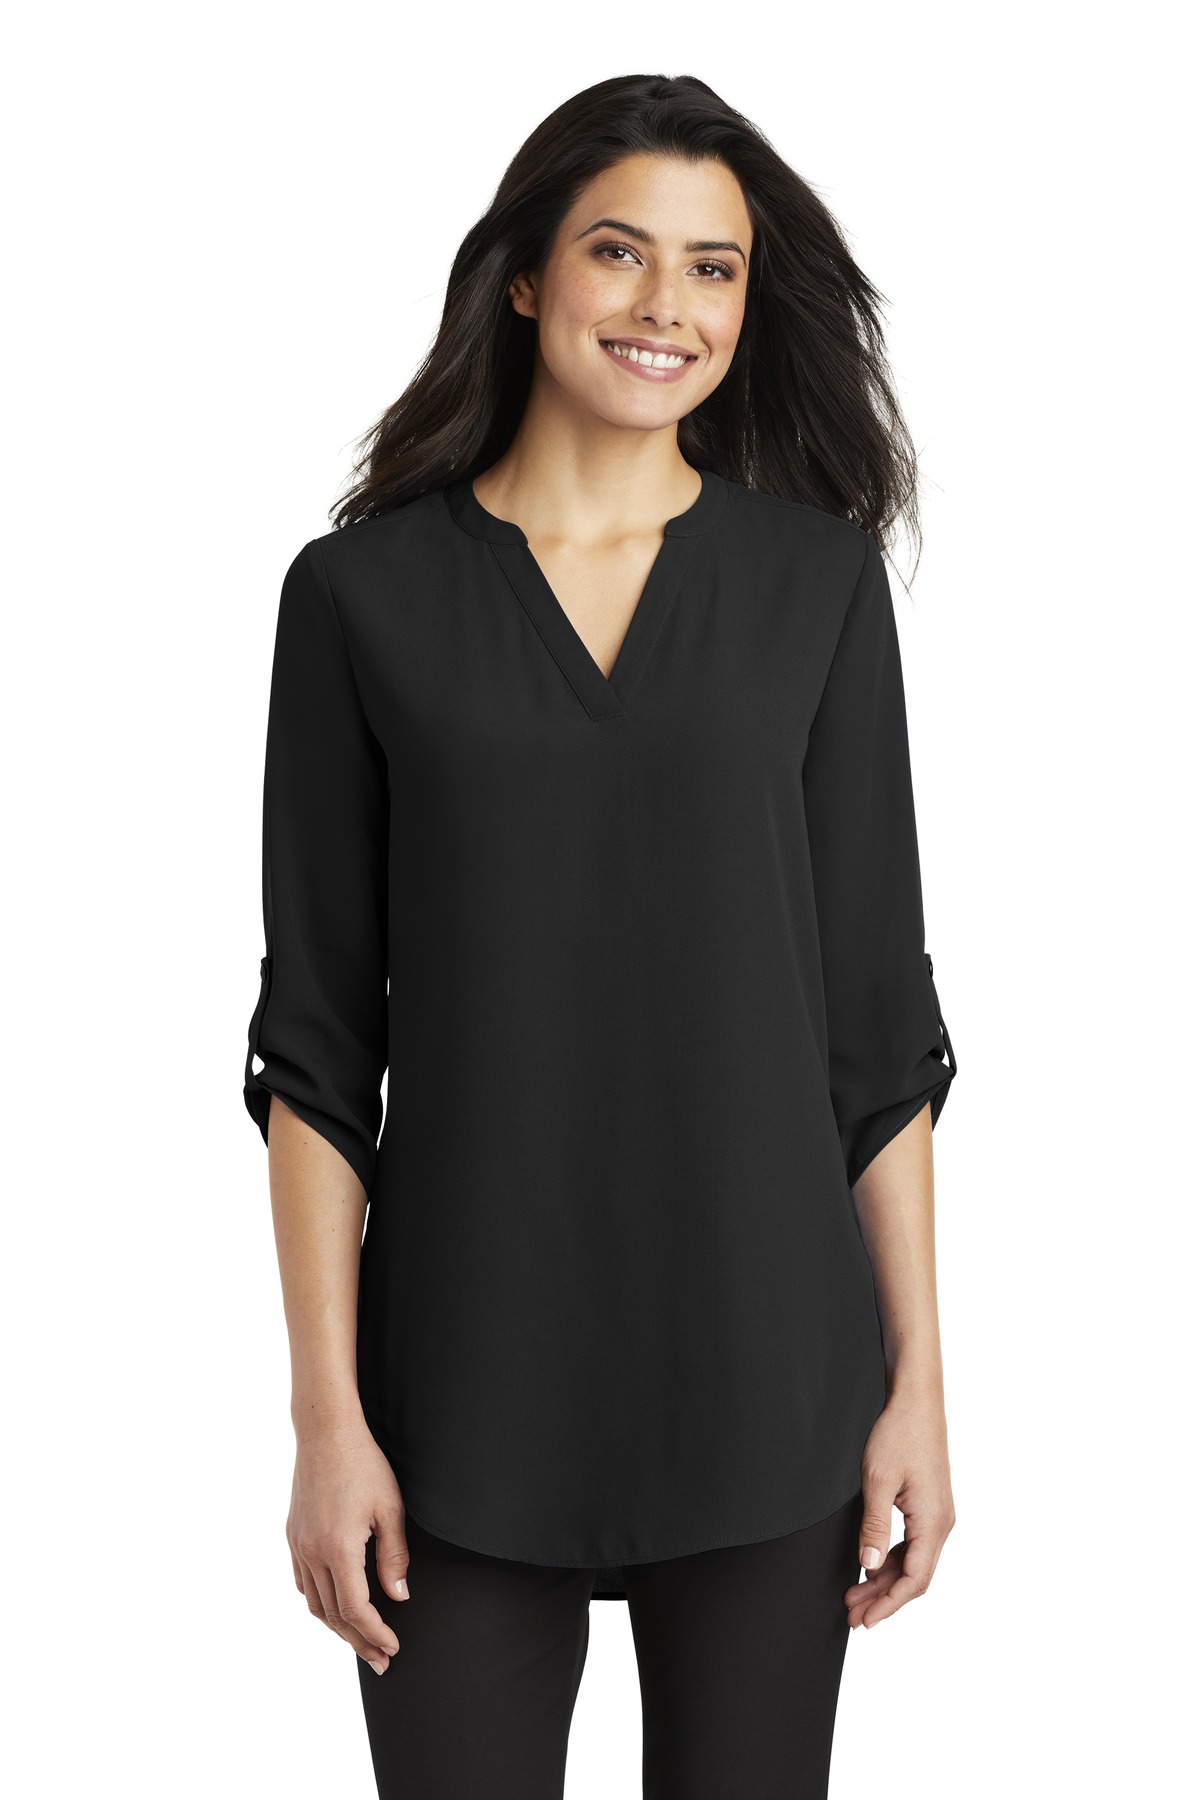 Port Authority Ladies Woven Shirts for Hospitality- ® Ladies 3/4-Sleeve Tunic Blouse.-Port Authority